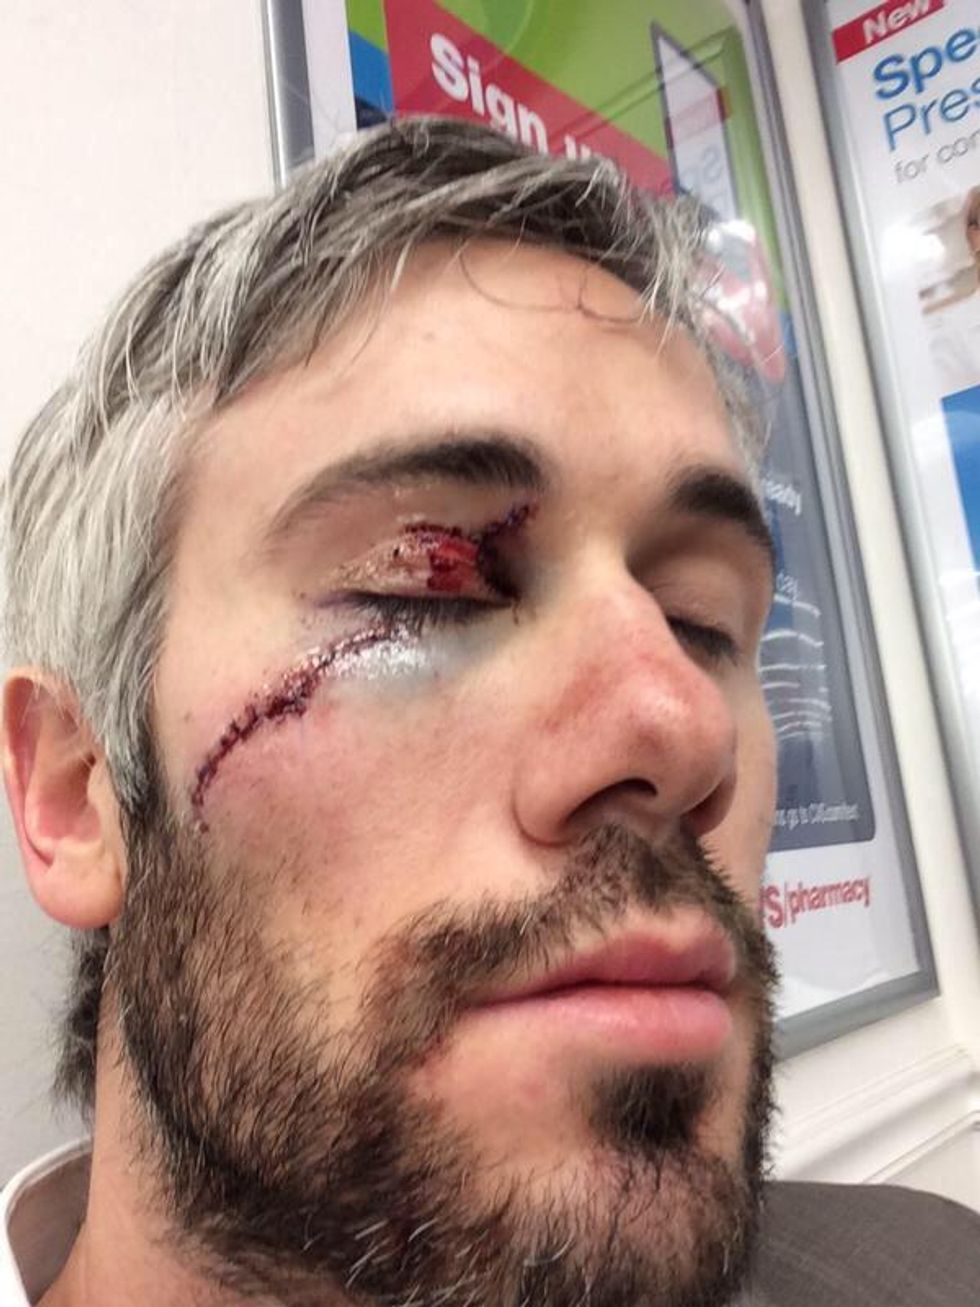 Here's What an NHL Player's Face Looked Like After a Freak Accident on the Ice